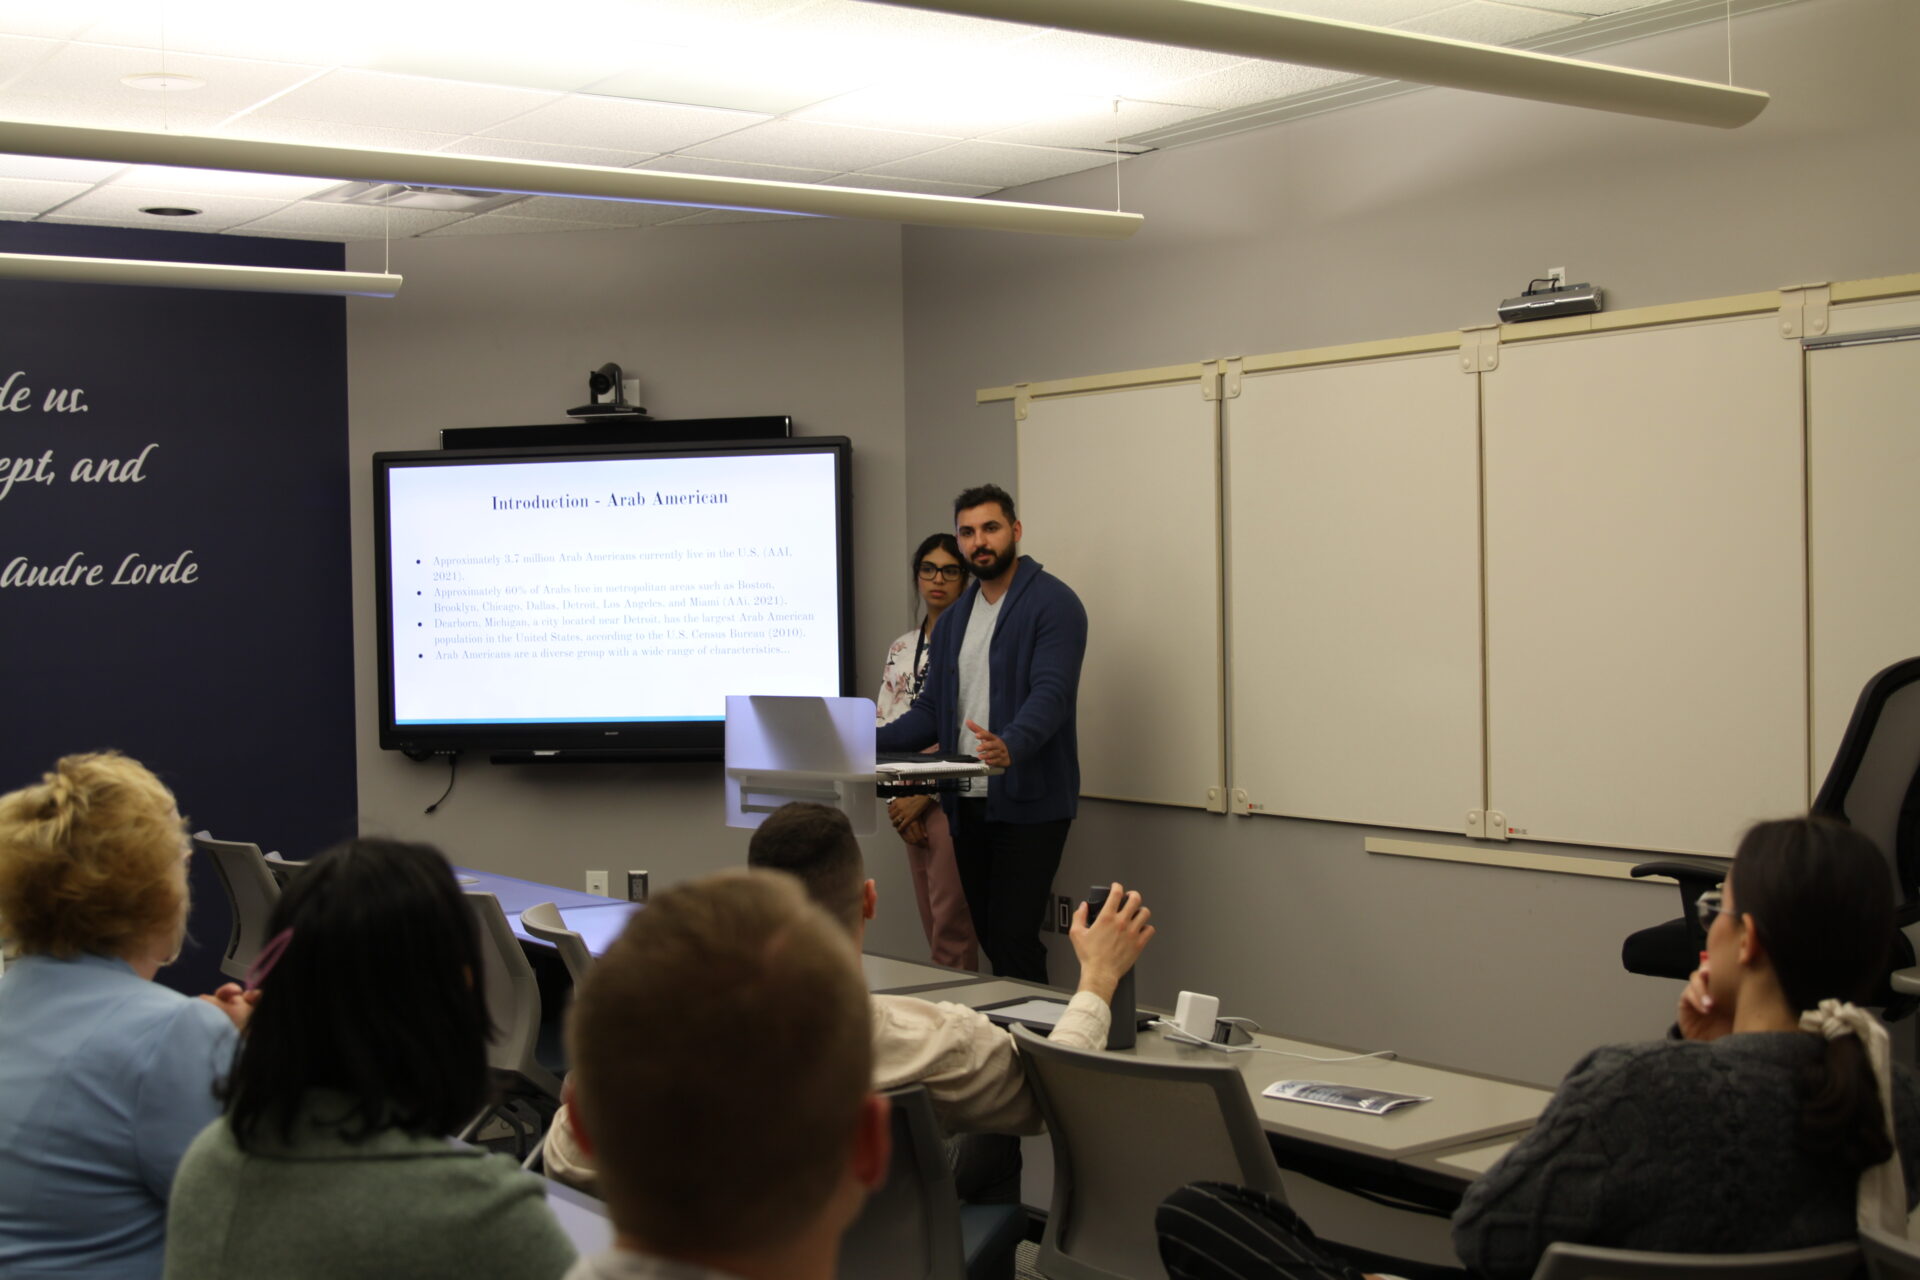 Qandeel Minal (MA '21, PsyD 2) and Jamal Ghazi (MA '21, PsyD 2) shared their research on "Understanding the Intersection of Acculturation, Attachment Styles, Parenting Styles, and Psychological Well-Being in South Asian and Arab American Muslin Communities" during a panel presentation.